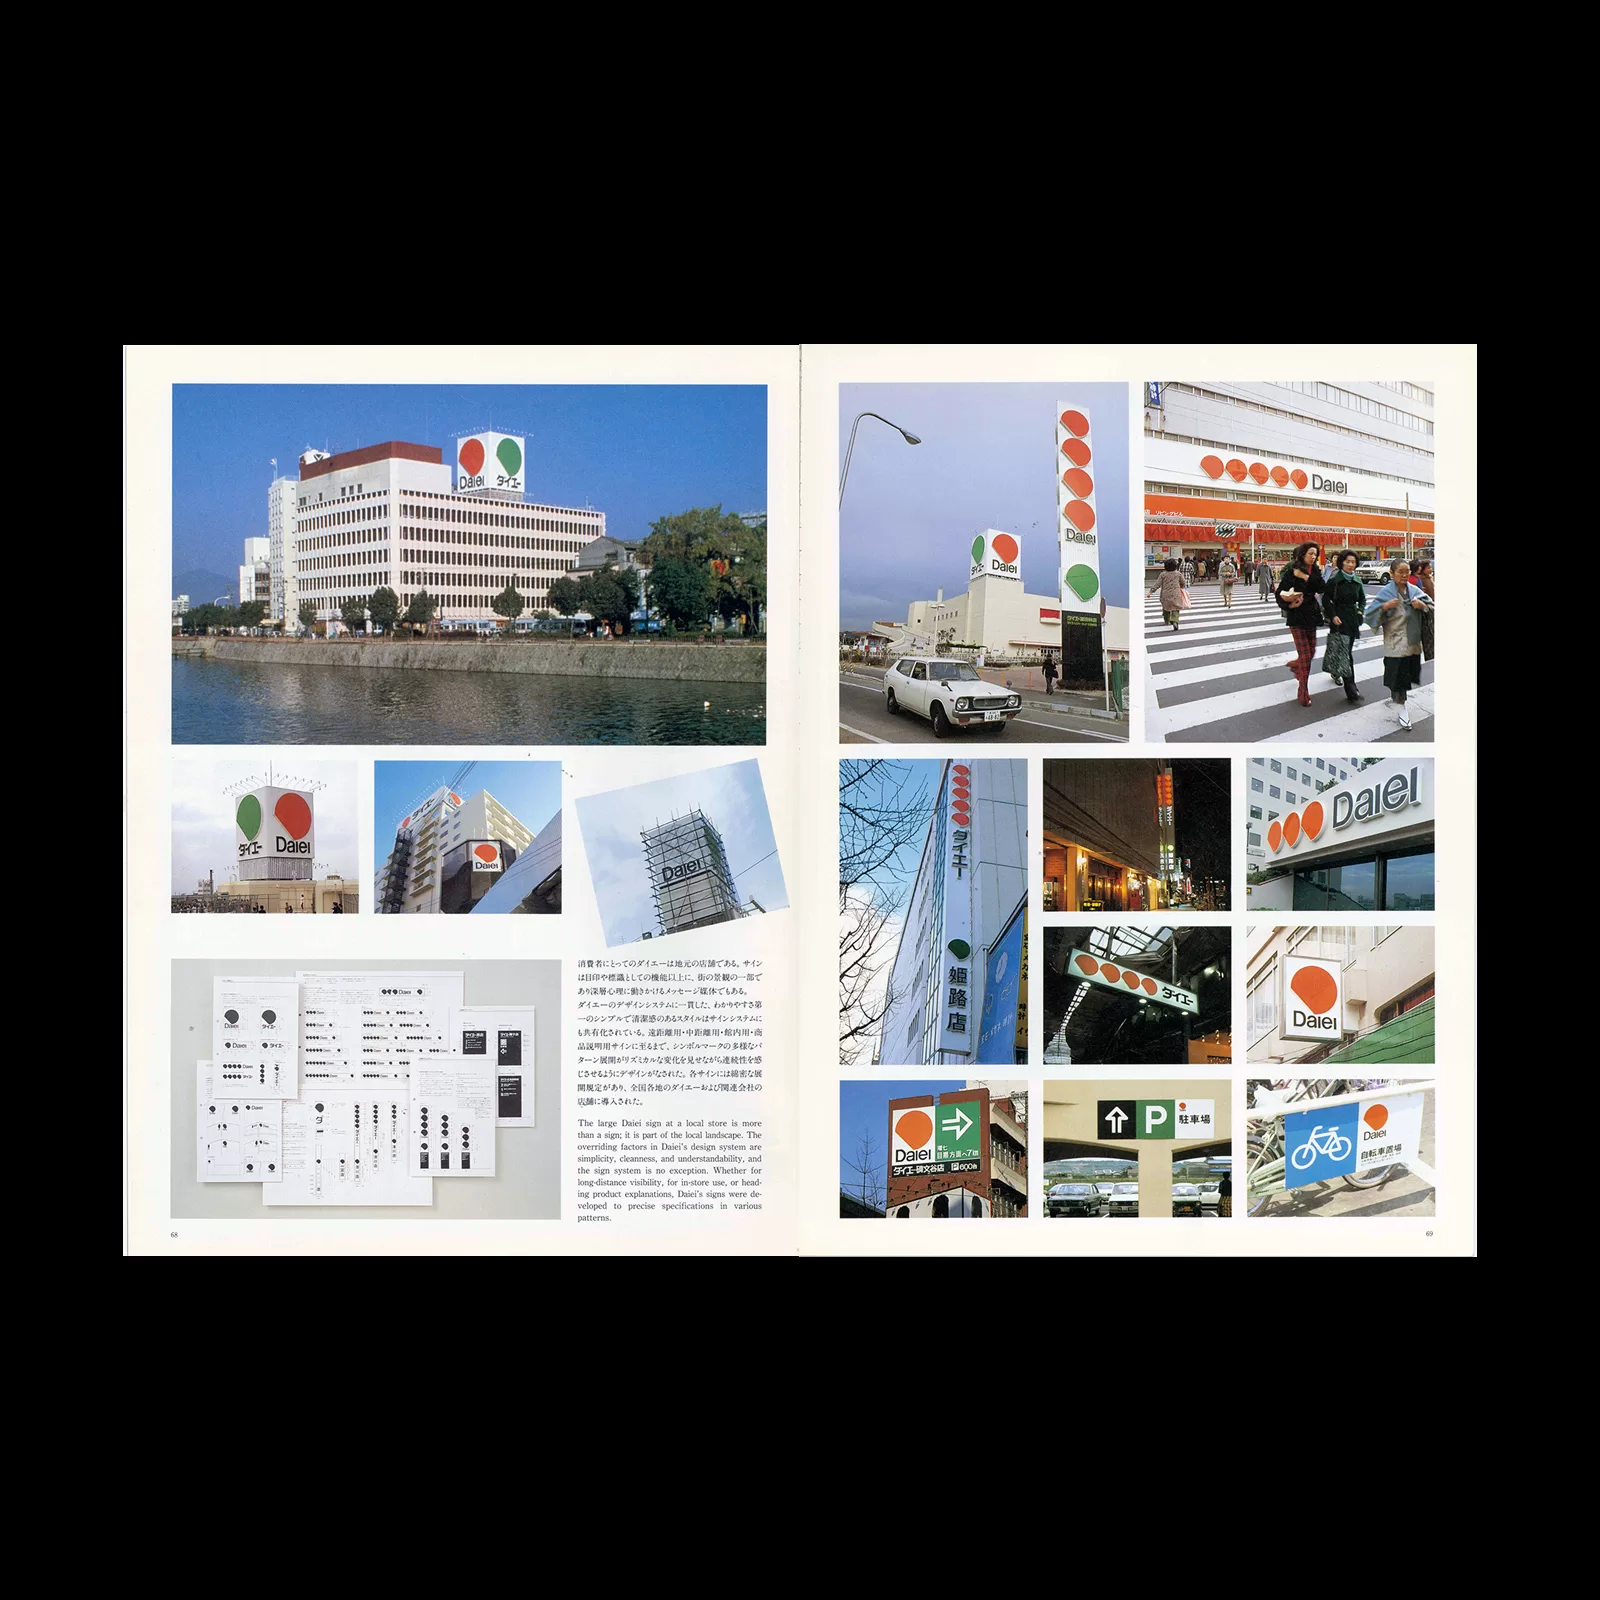 Dalei - PAOS Design, [The World of Corporate Beauty], CI Design, (23 Book Set), 1989